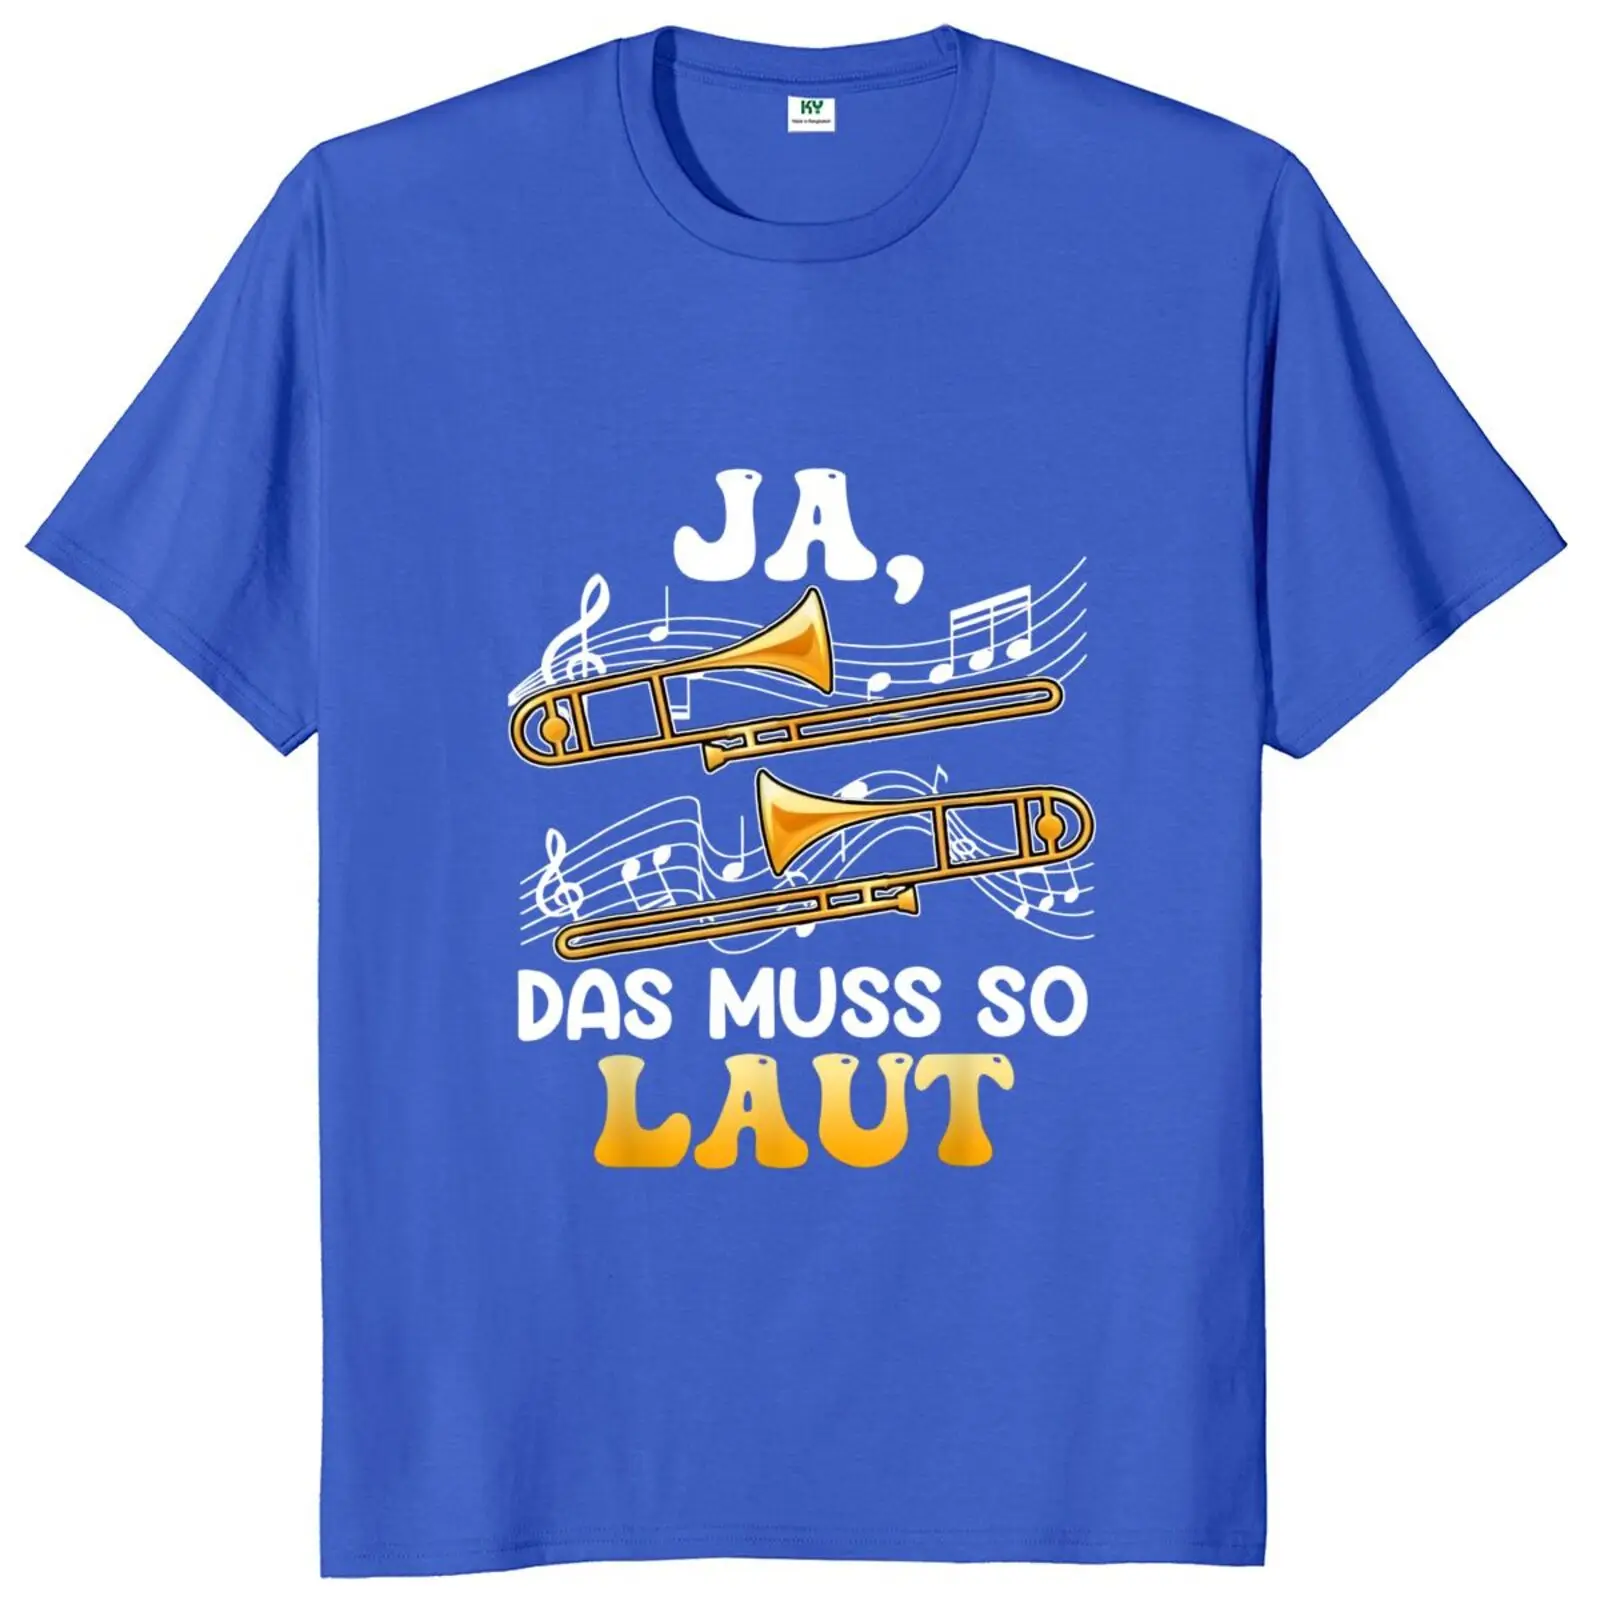 

Trombone It Has To Be So Loud T Shirt Funny German Text Music Lovres Tee Tops Casual 100% Cotton Unisex Soft T-shirt EU Size